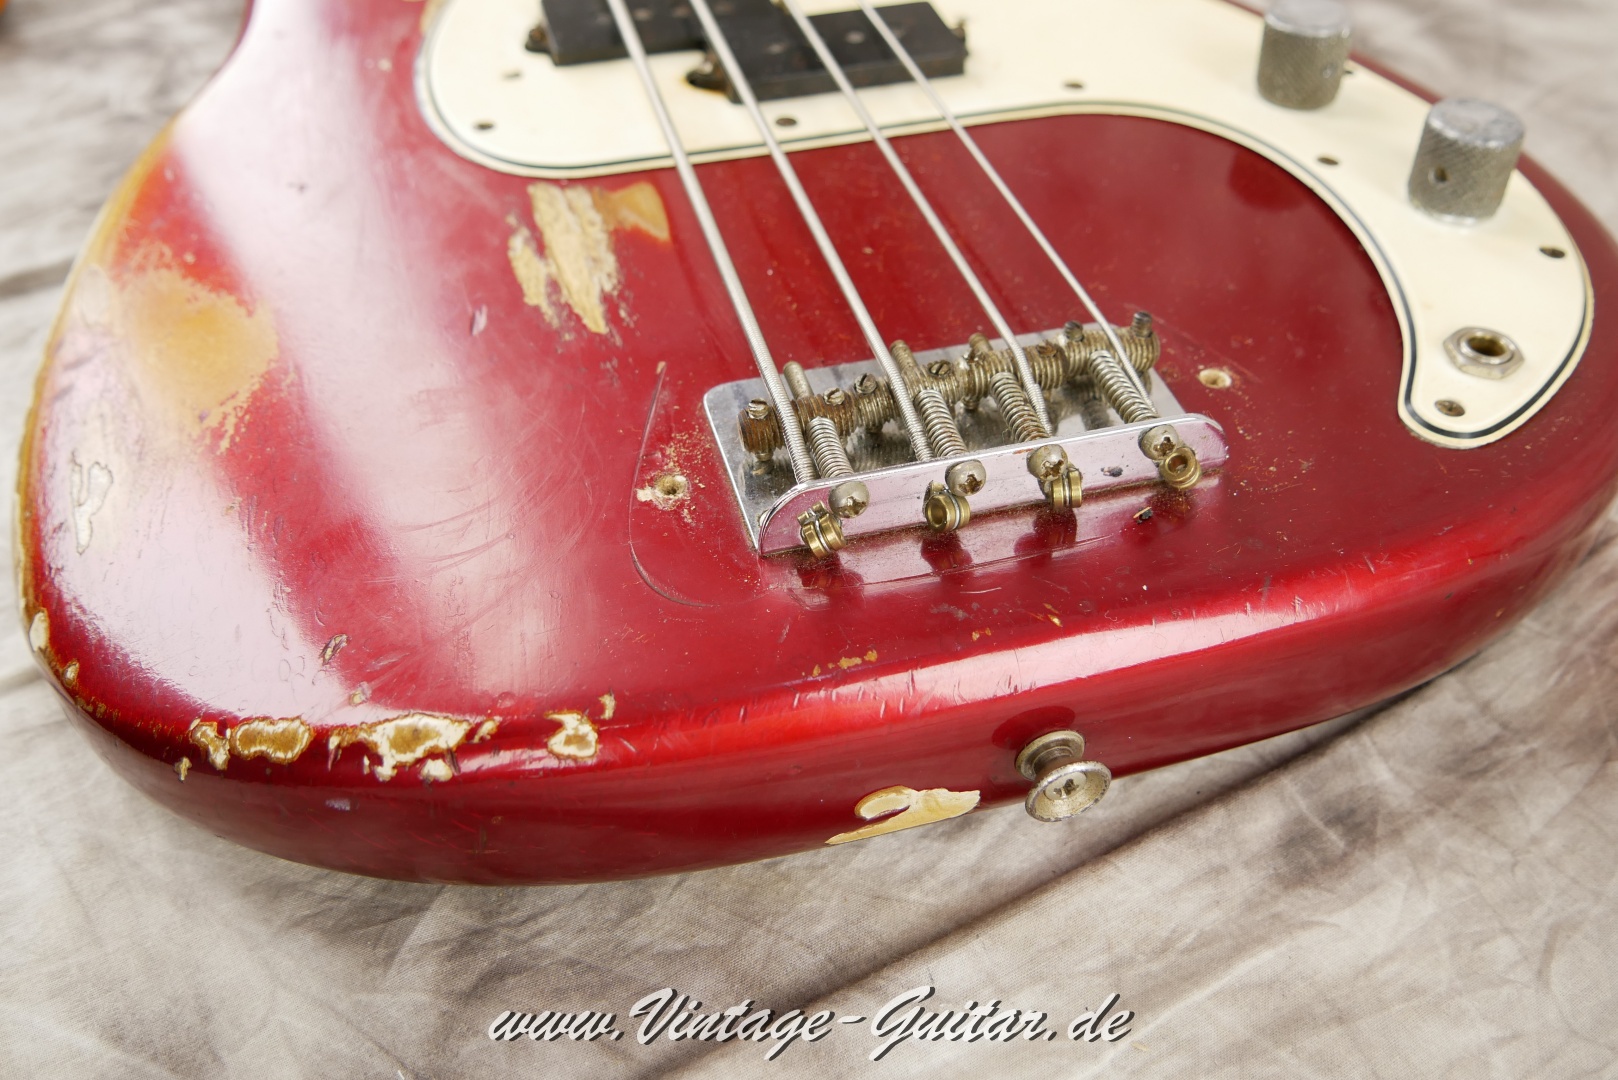 Fender-Precision-Bass-1963-candy-apple-red-017.JPG